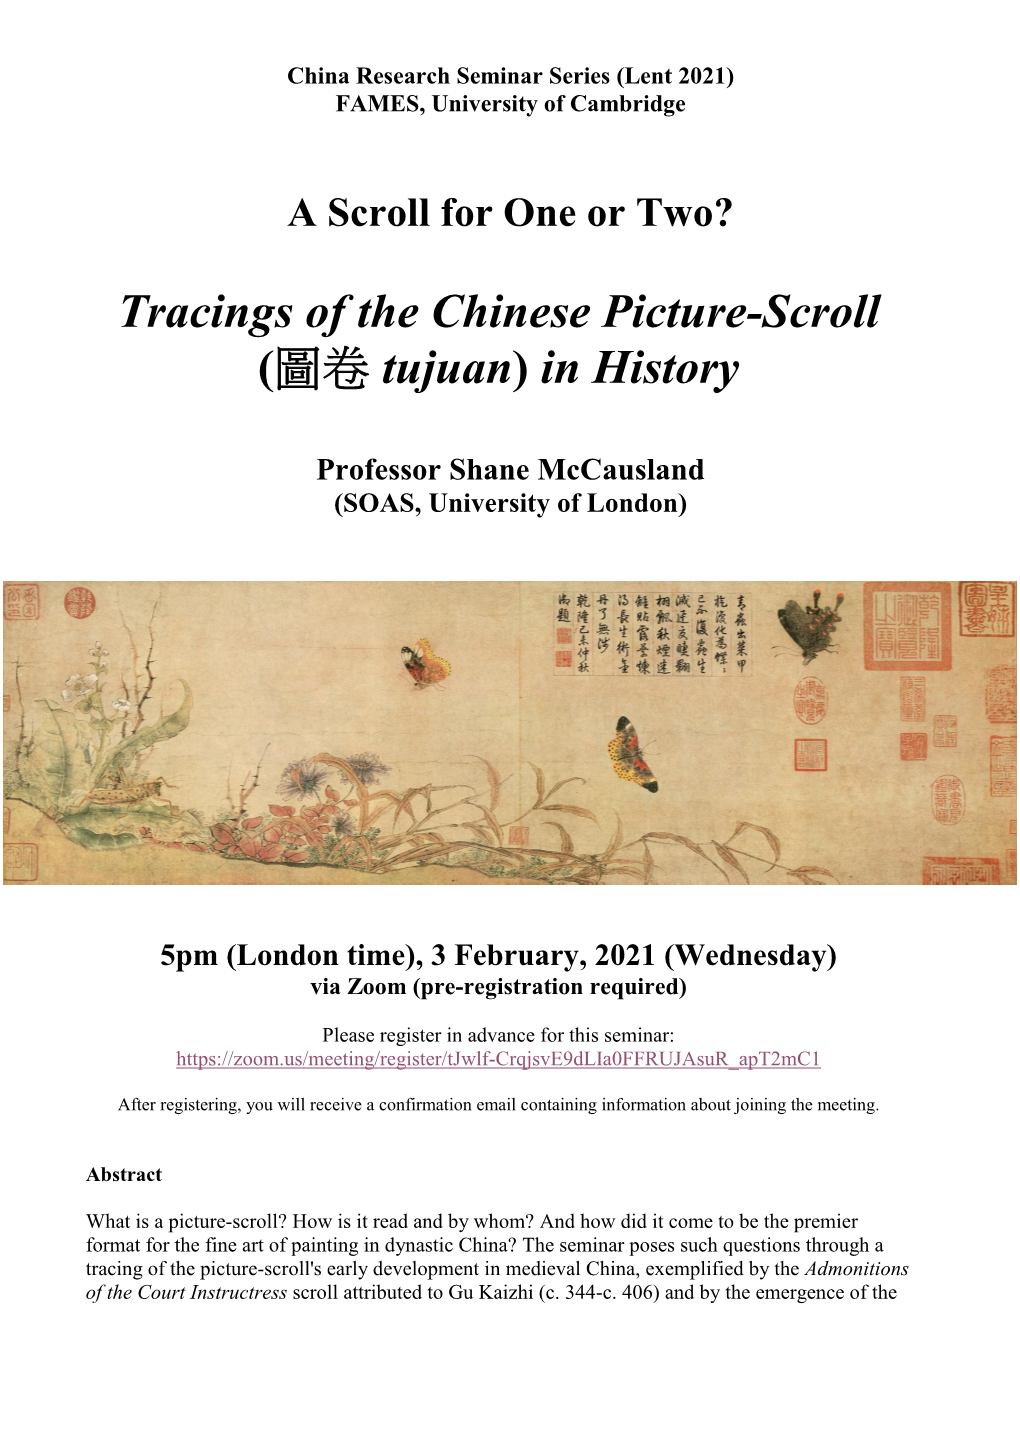 Tracings of the Chinese Picture-Scroll (圖卷 Tujuan) in History